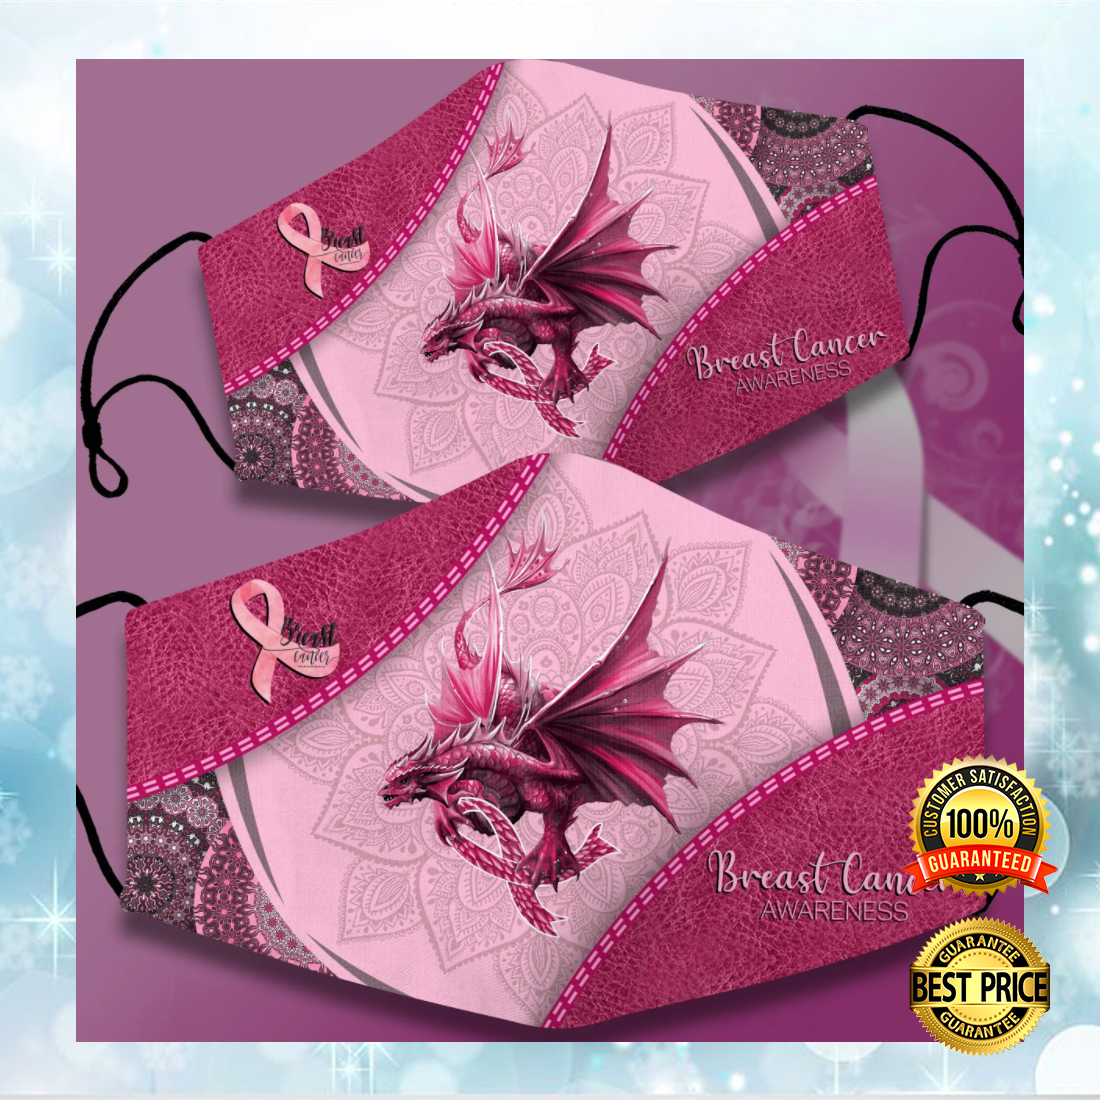 Dragon breast cancer awareness face mask 4